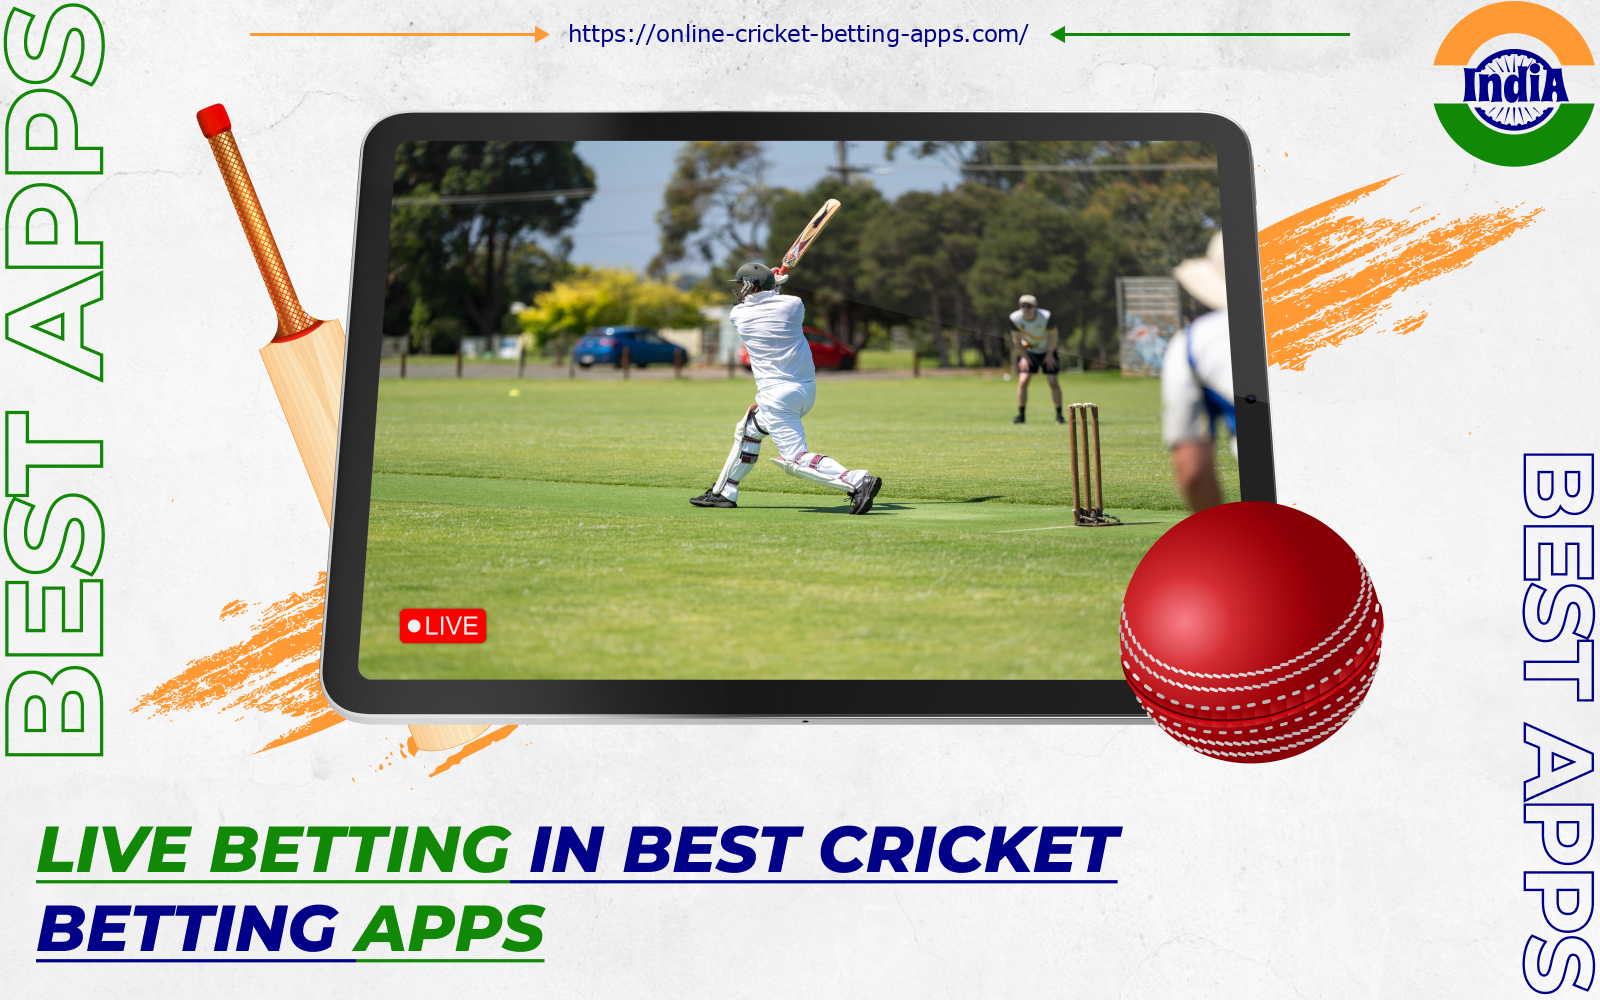 The best online cricket betting apps offer a wide range of real-time betting opportunities